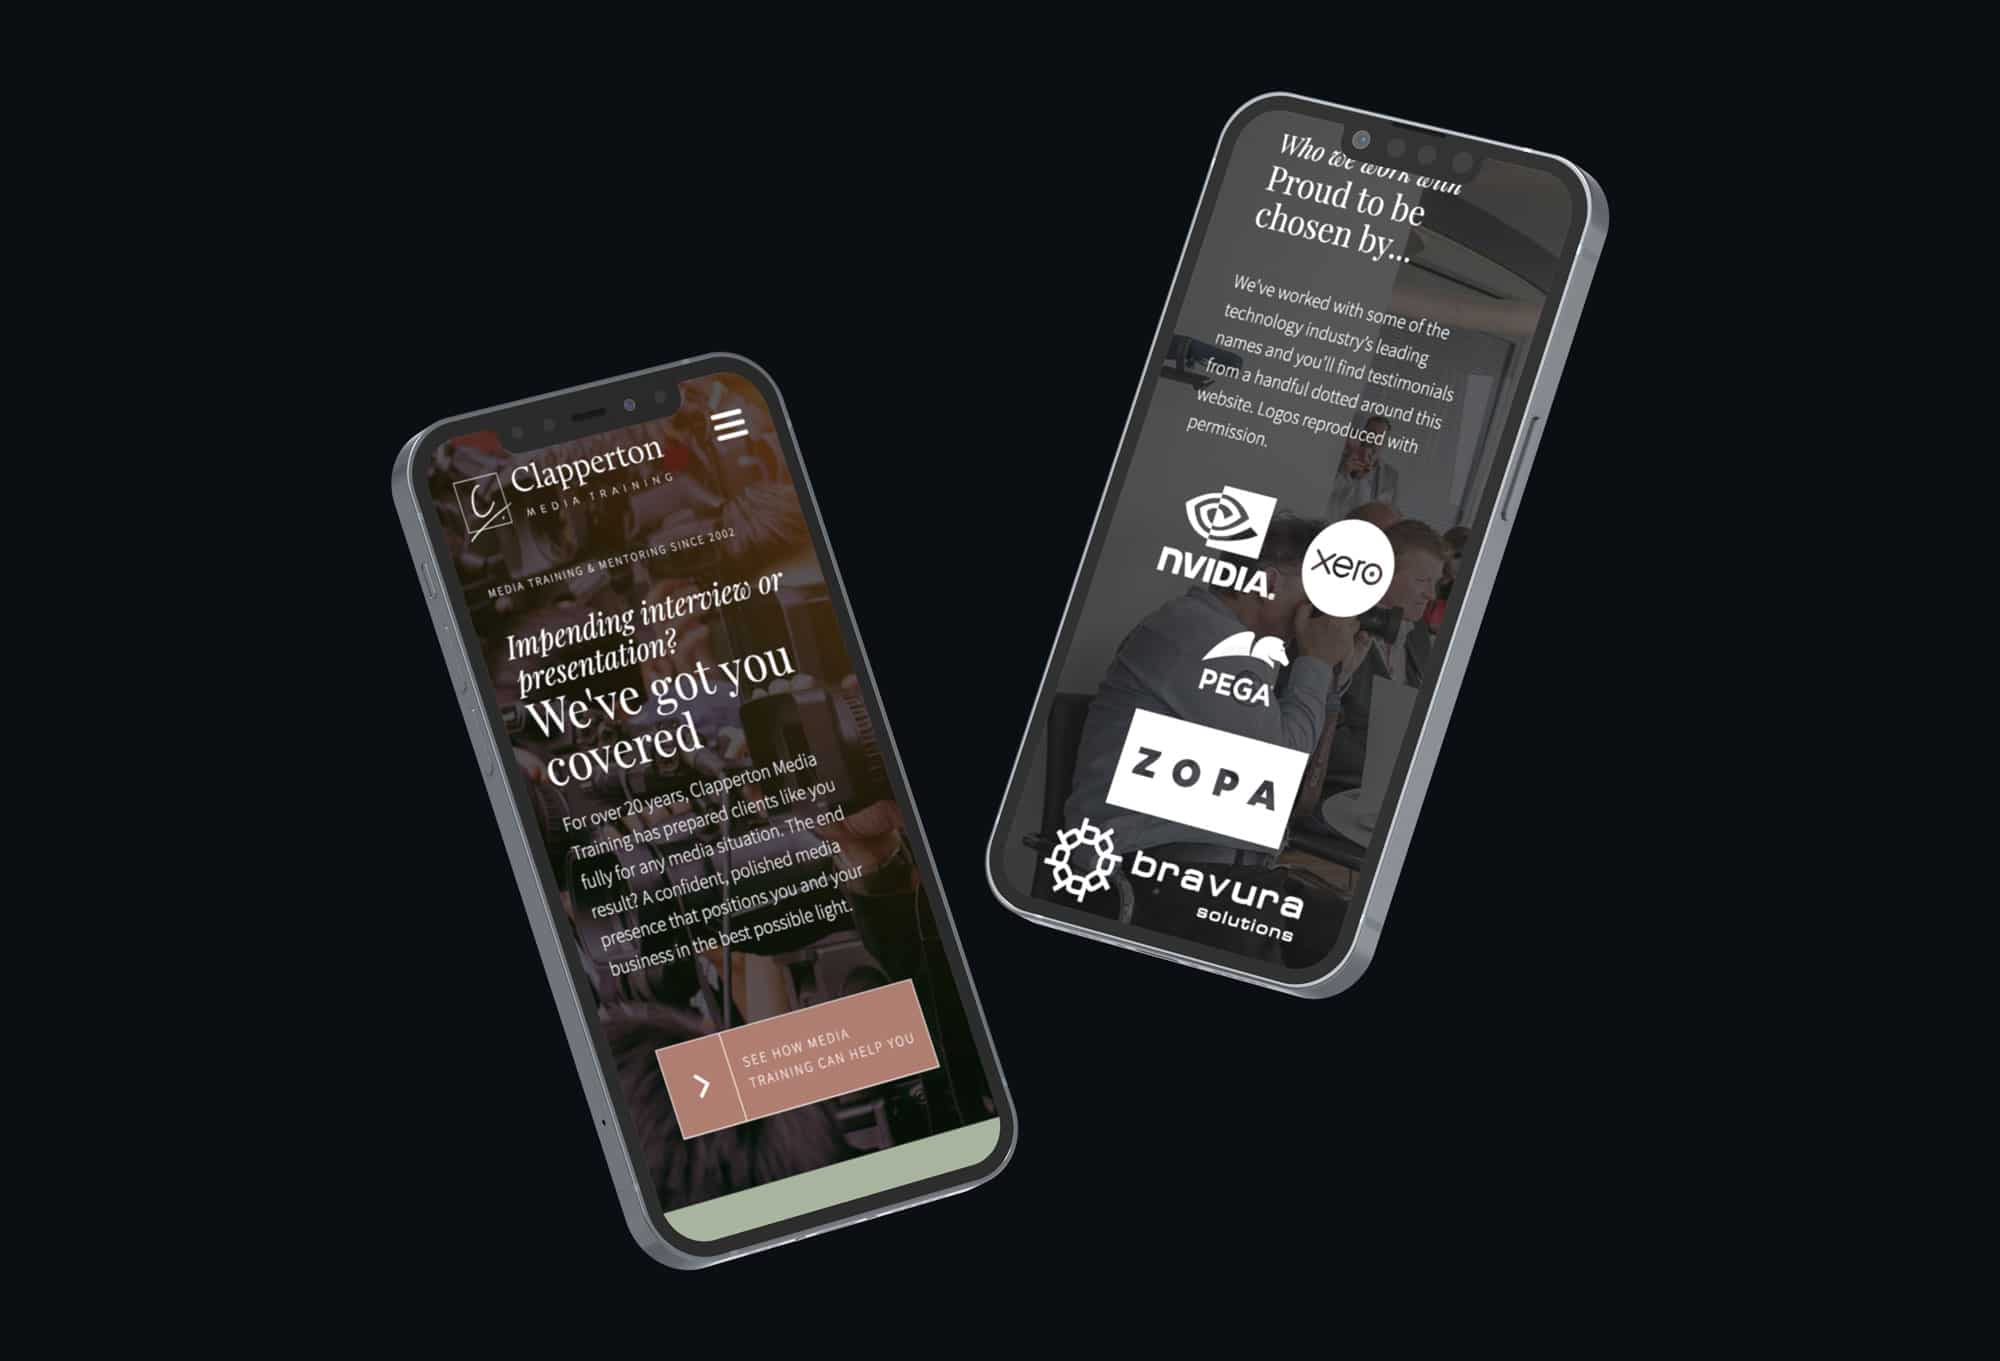 Different sections of The Clapperton Media website home page displayed on two iPhones